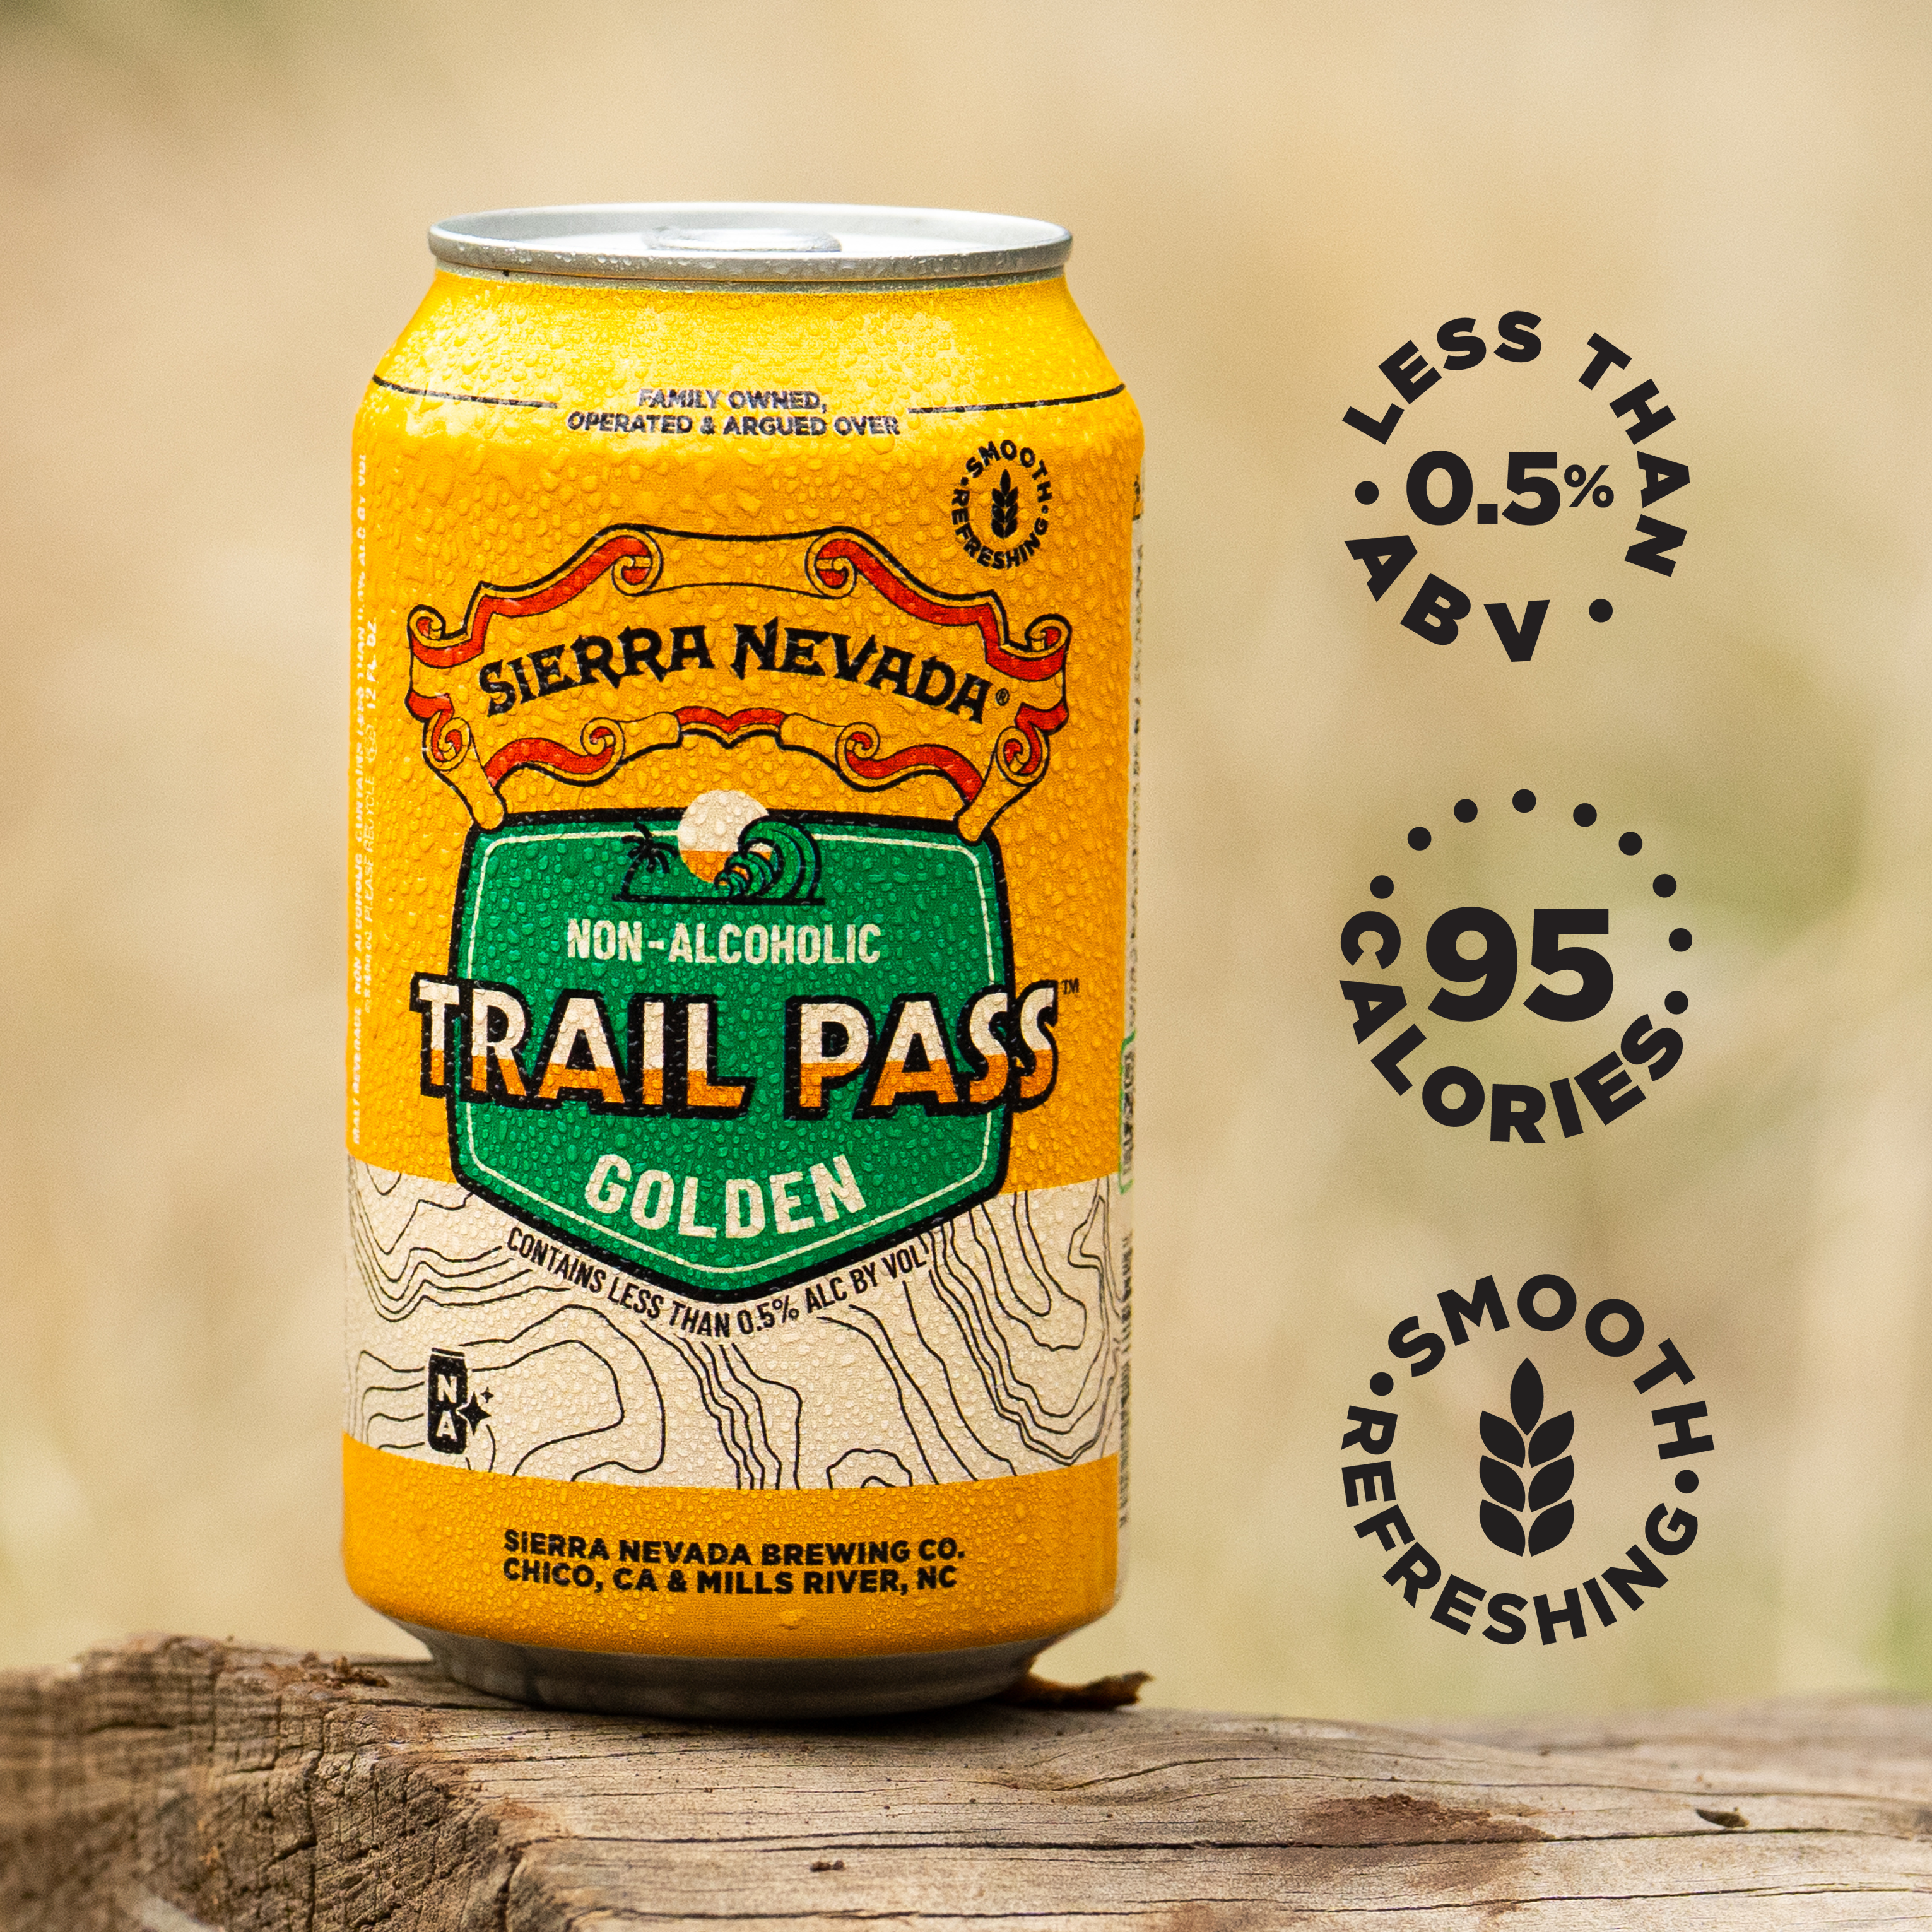 Sierra Nevada Trail Pass Golden 12oz can with nutritional information icons